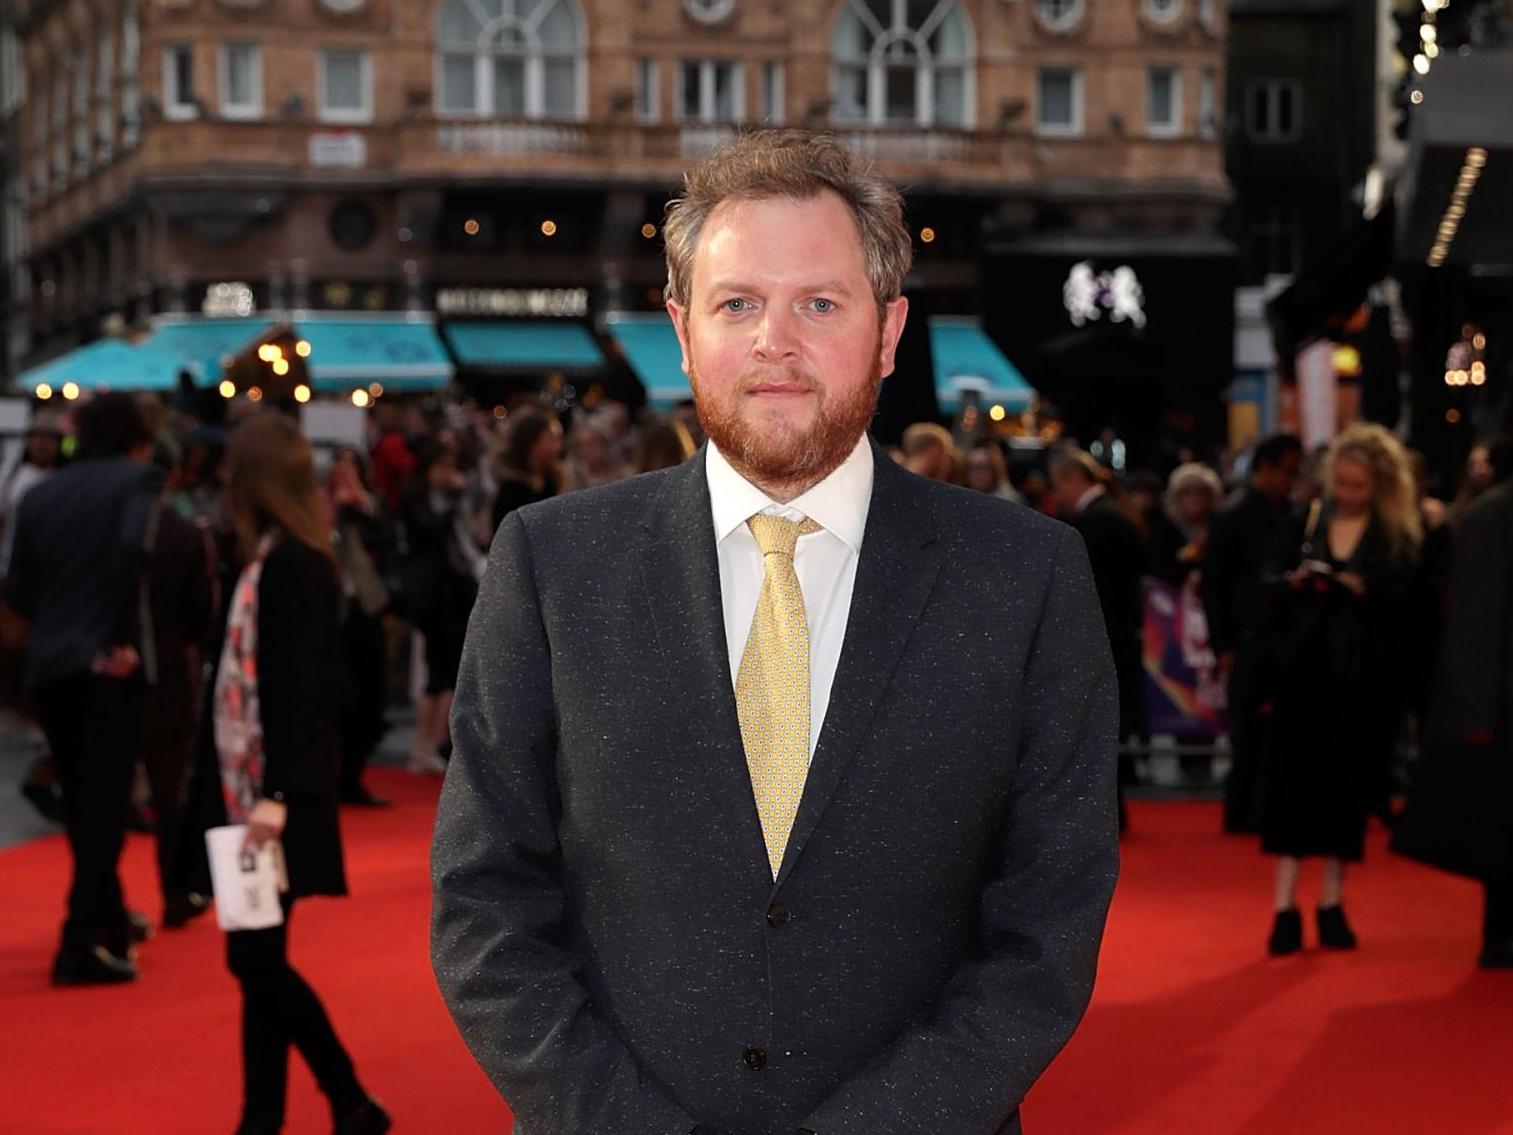 Comedian and actor Miles Jupp is among those to have performances on NextUp